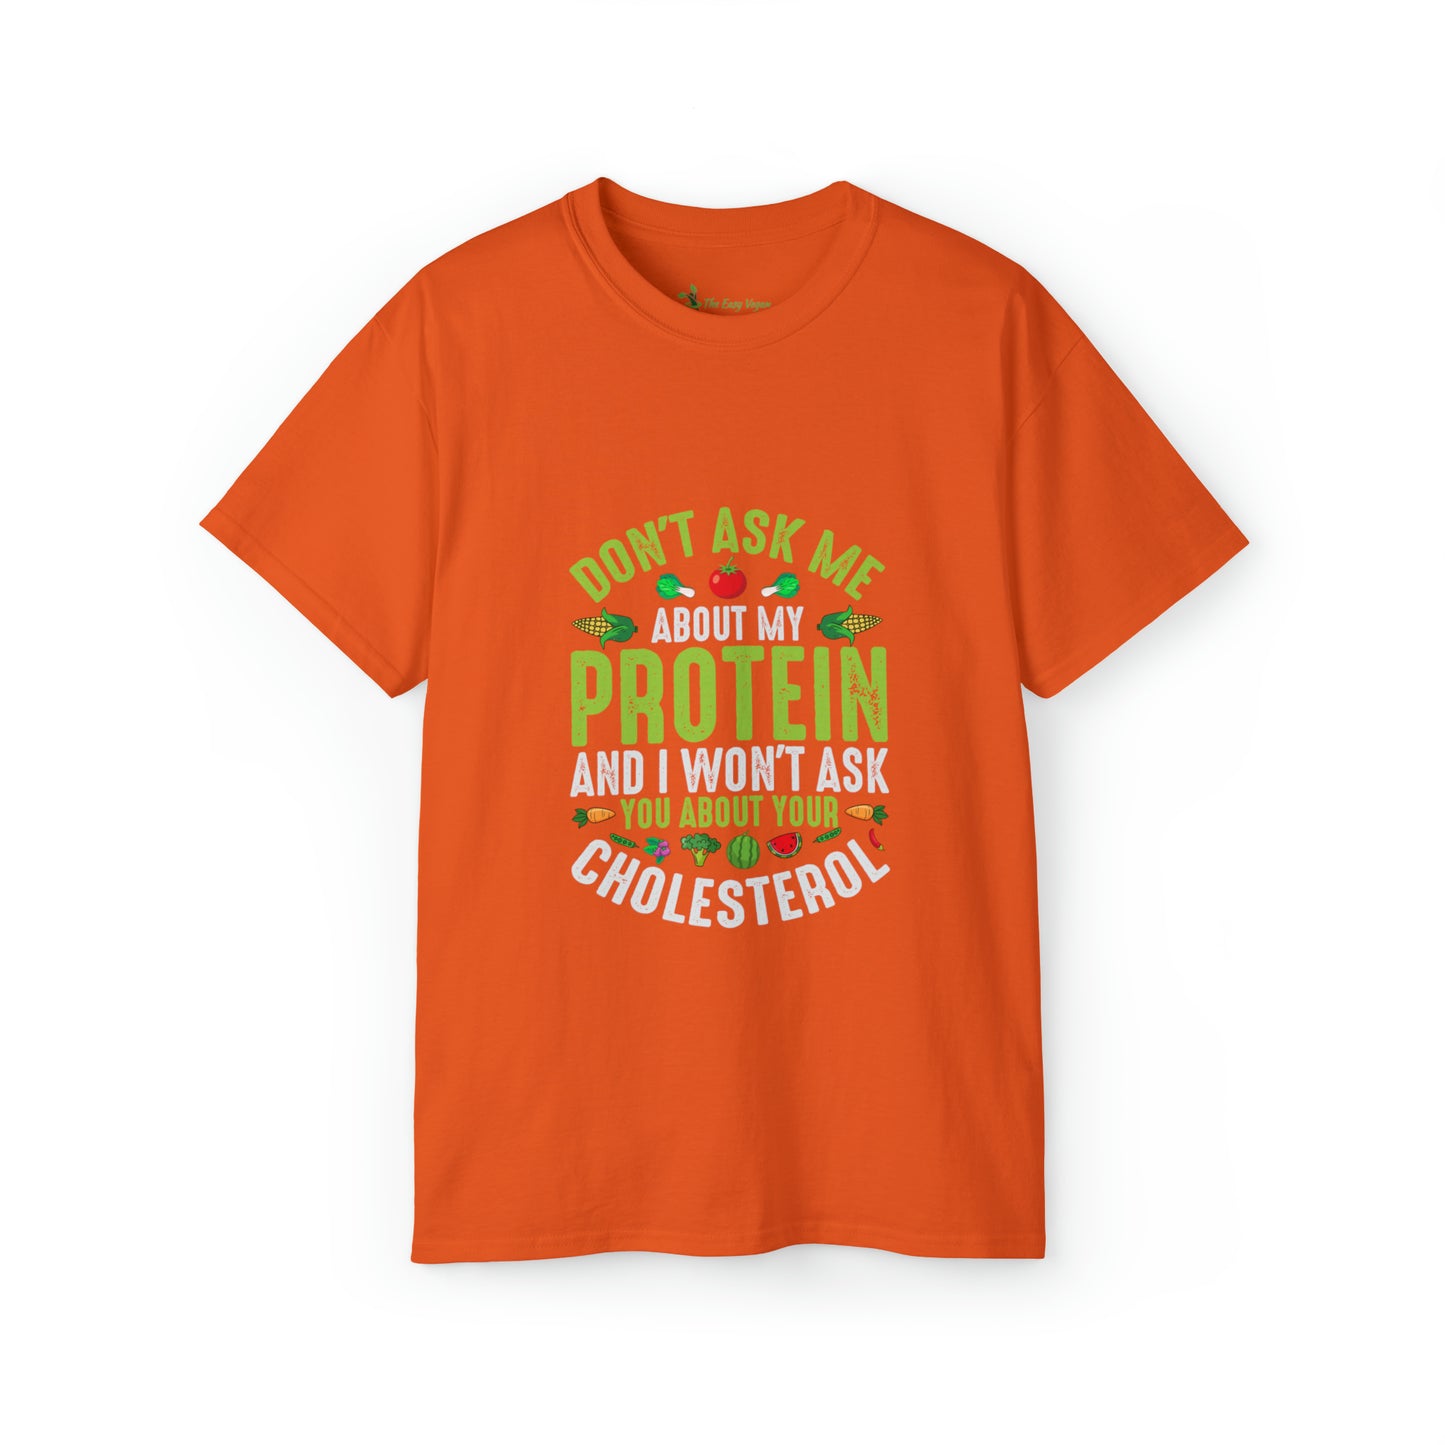 Don't ask me about Protein and I won't ask you about cholesterol - Unisex Ultra Cotton Tee